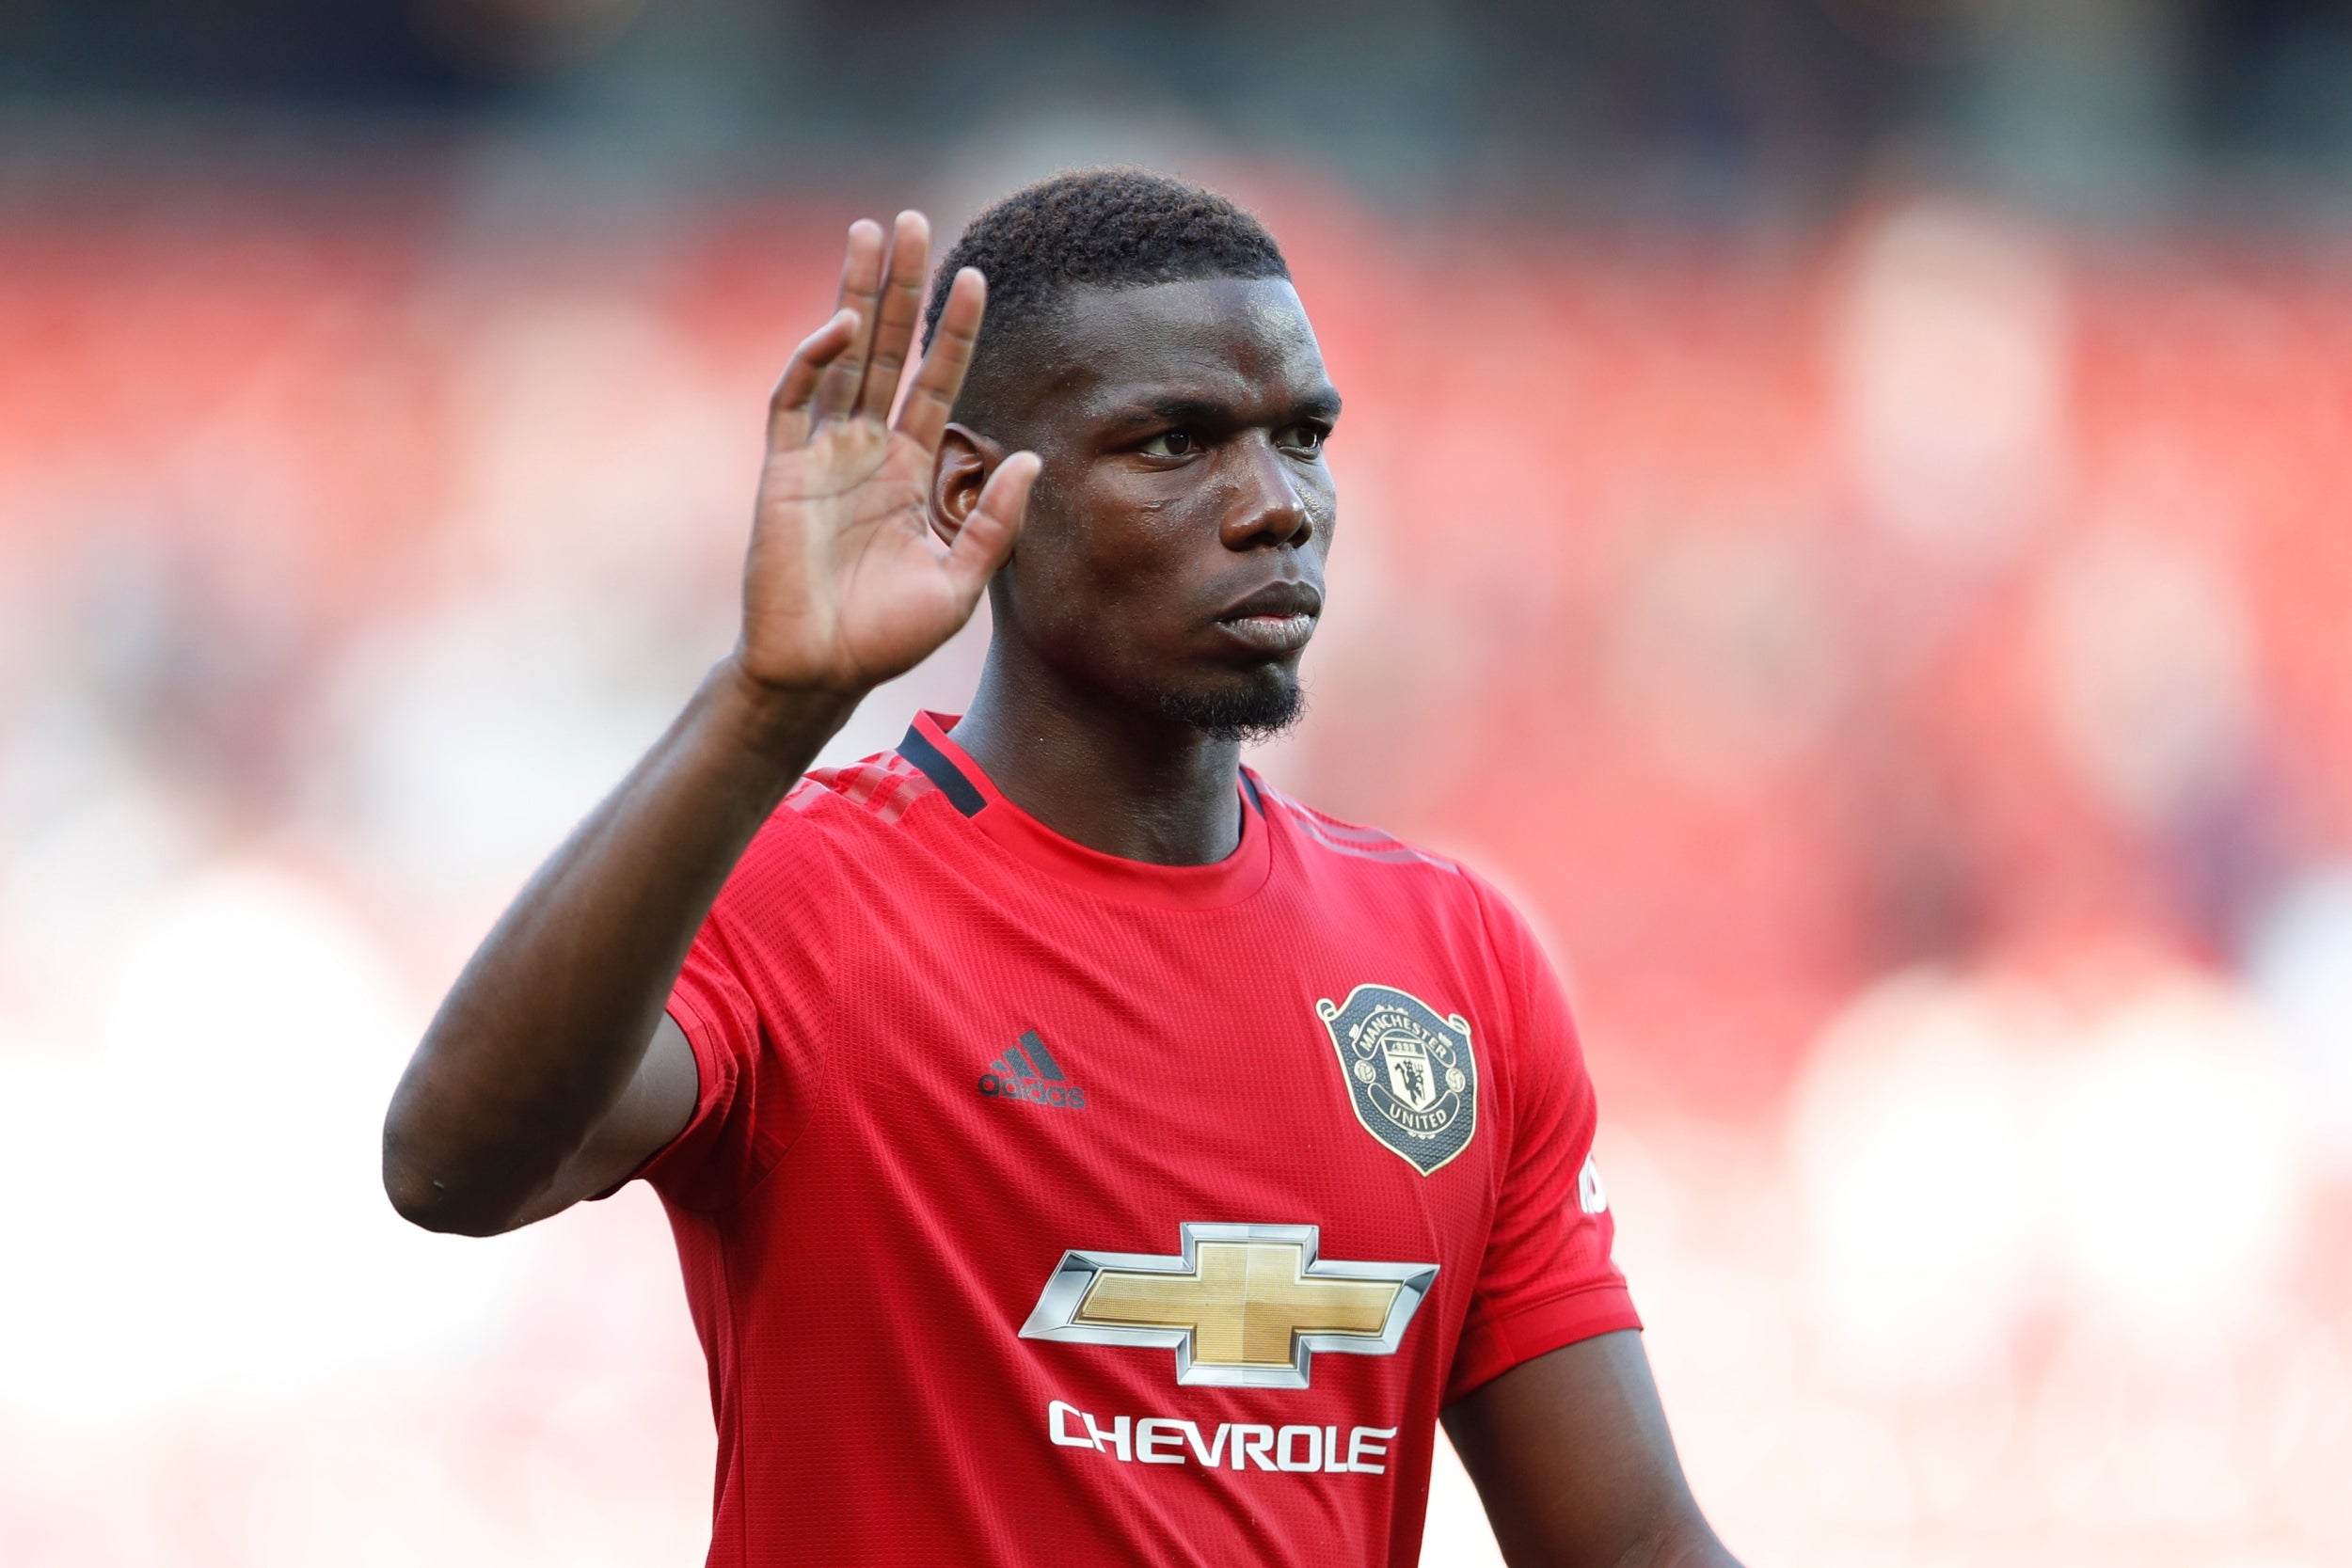 Paul Pogba won't sign new Manchester United contract offer - Euro papers - Bóng Đá